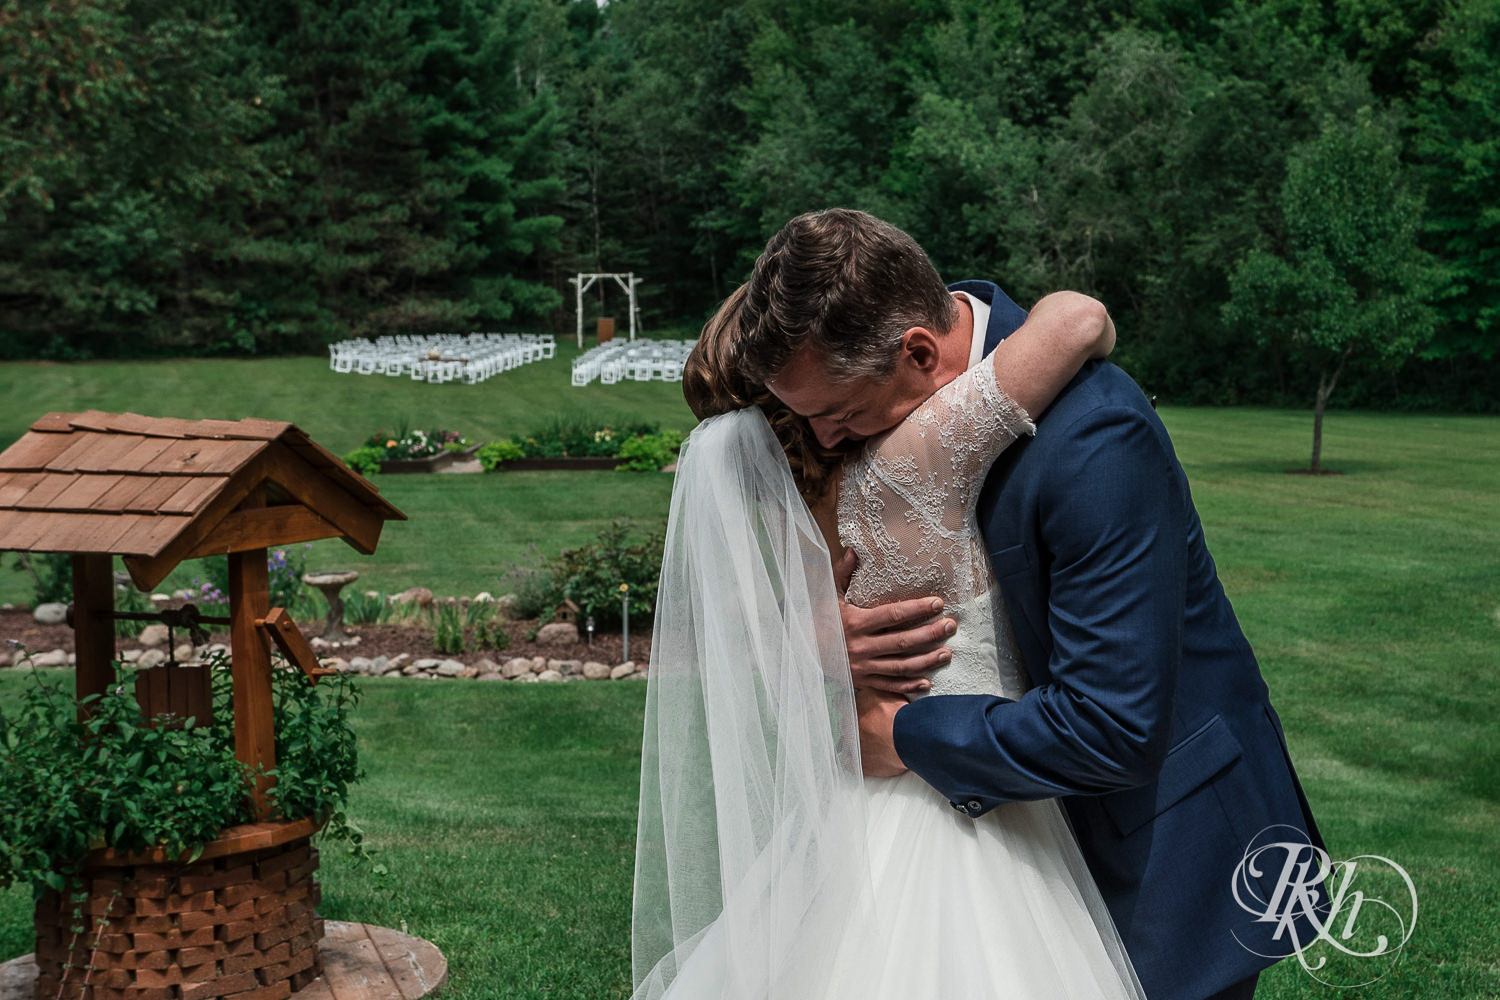 Bride and groom hug during first look on wedding day in Elk Mound, Wisconsin.